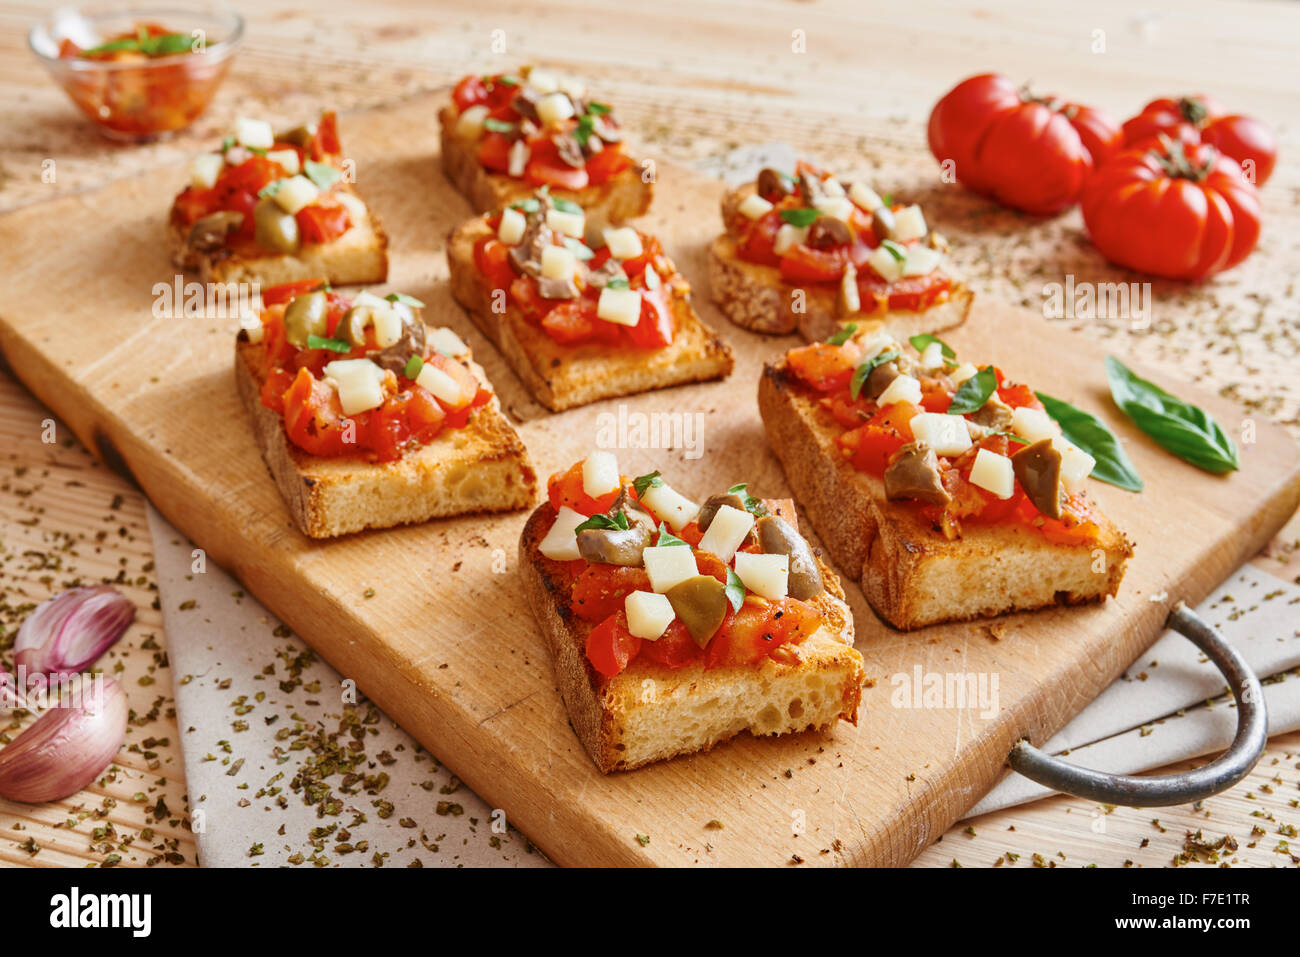 Bruschetta tomato, cheese, olives and garlic on cutting board and wooden table surrounded by tomato and garlic Stock Photo